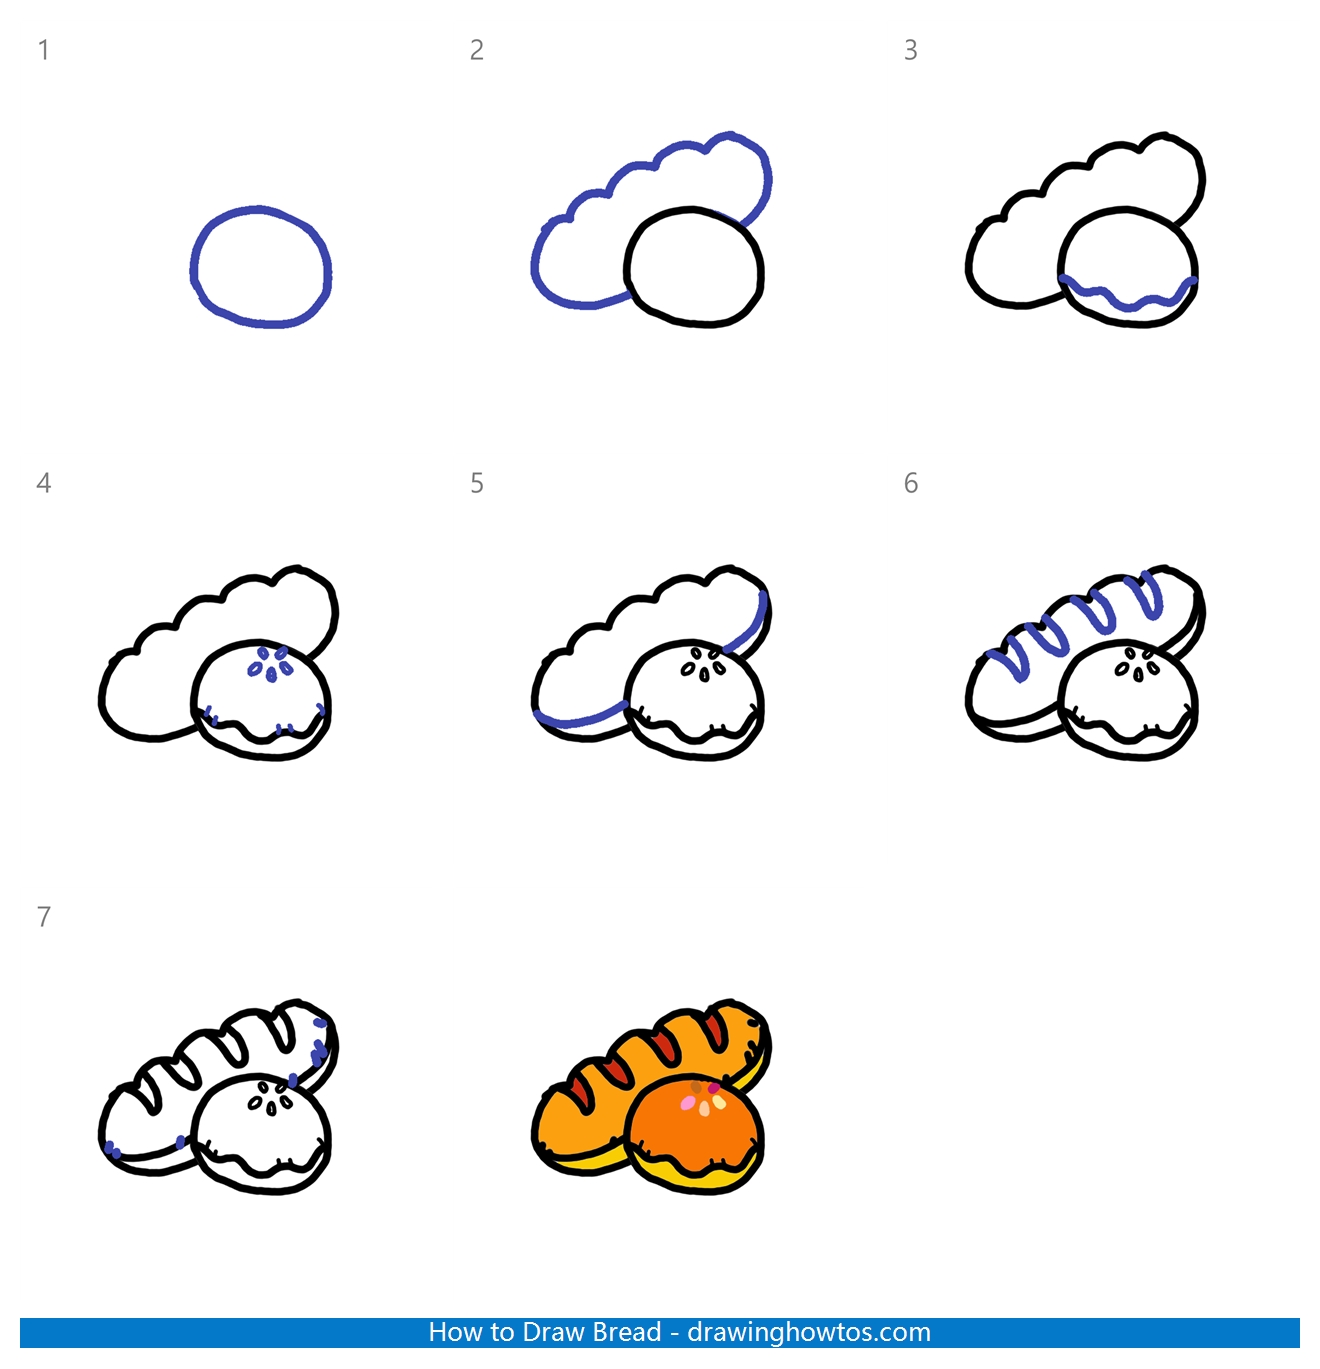 how to draw bread step by step